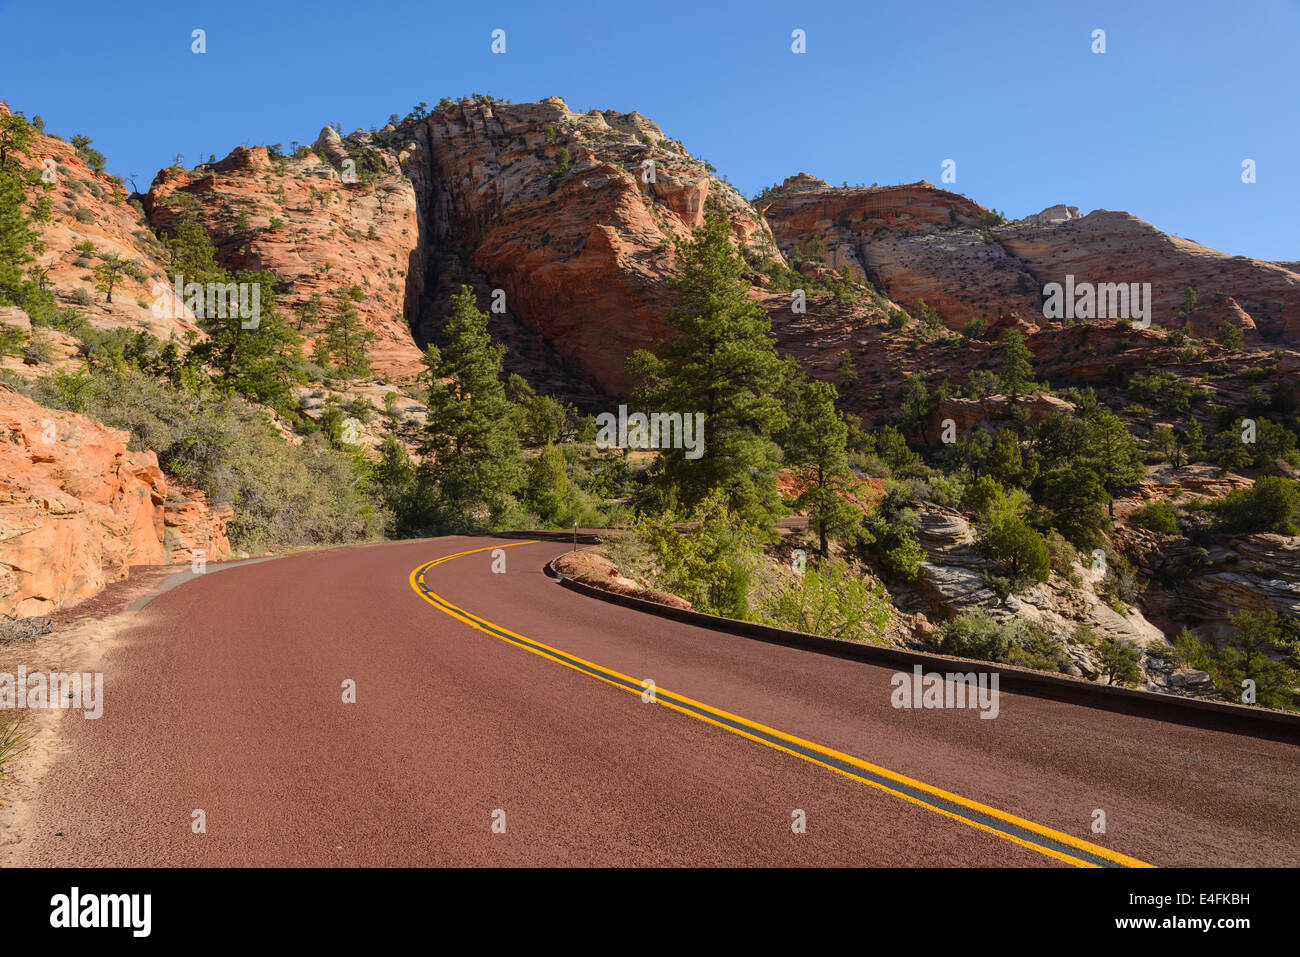 Zion - Mount Carmel Highway, Zion Plateau, Eastern section of Zion National Park, Utah, USA Stock Photo